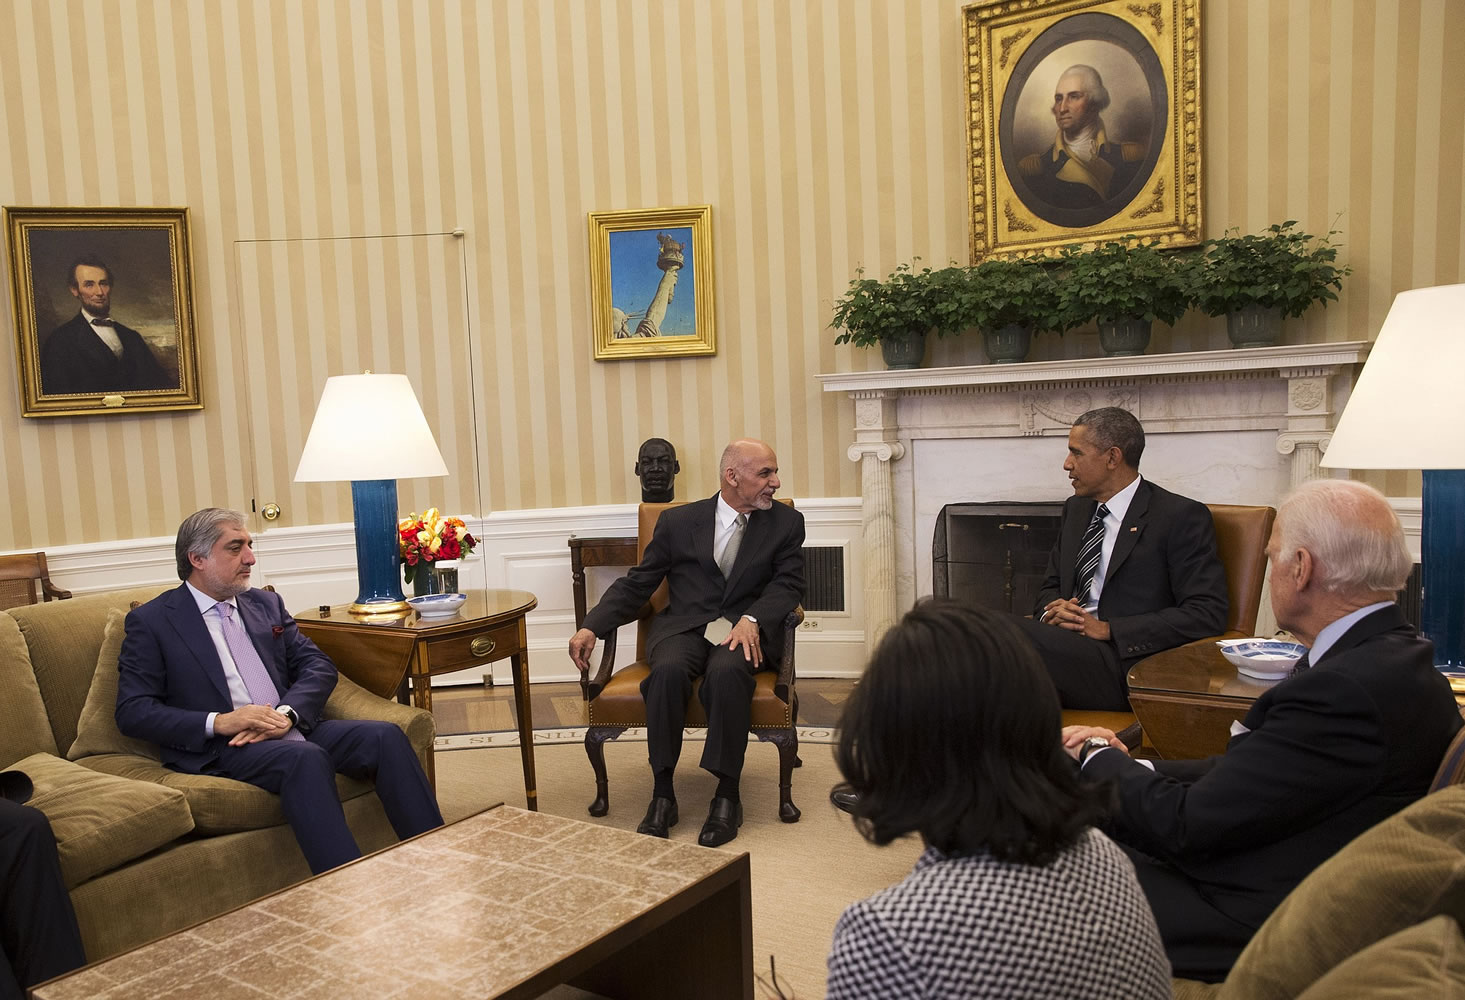 President Barack Obama and Vice President Joe Biden meet with Afghanistan's President Ashraf Ghani, center and Afghanistan's Chief Executive Officer Abdullah Abdullah, left, Tuesday in the Oval Office of the White House in Washington.